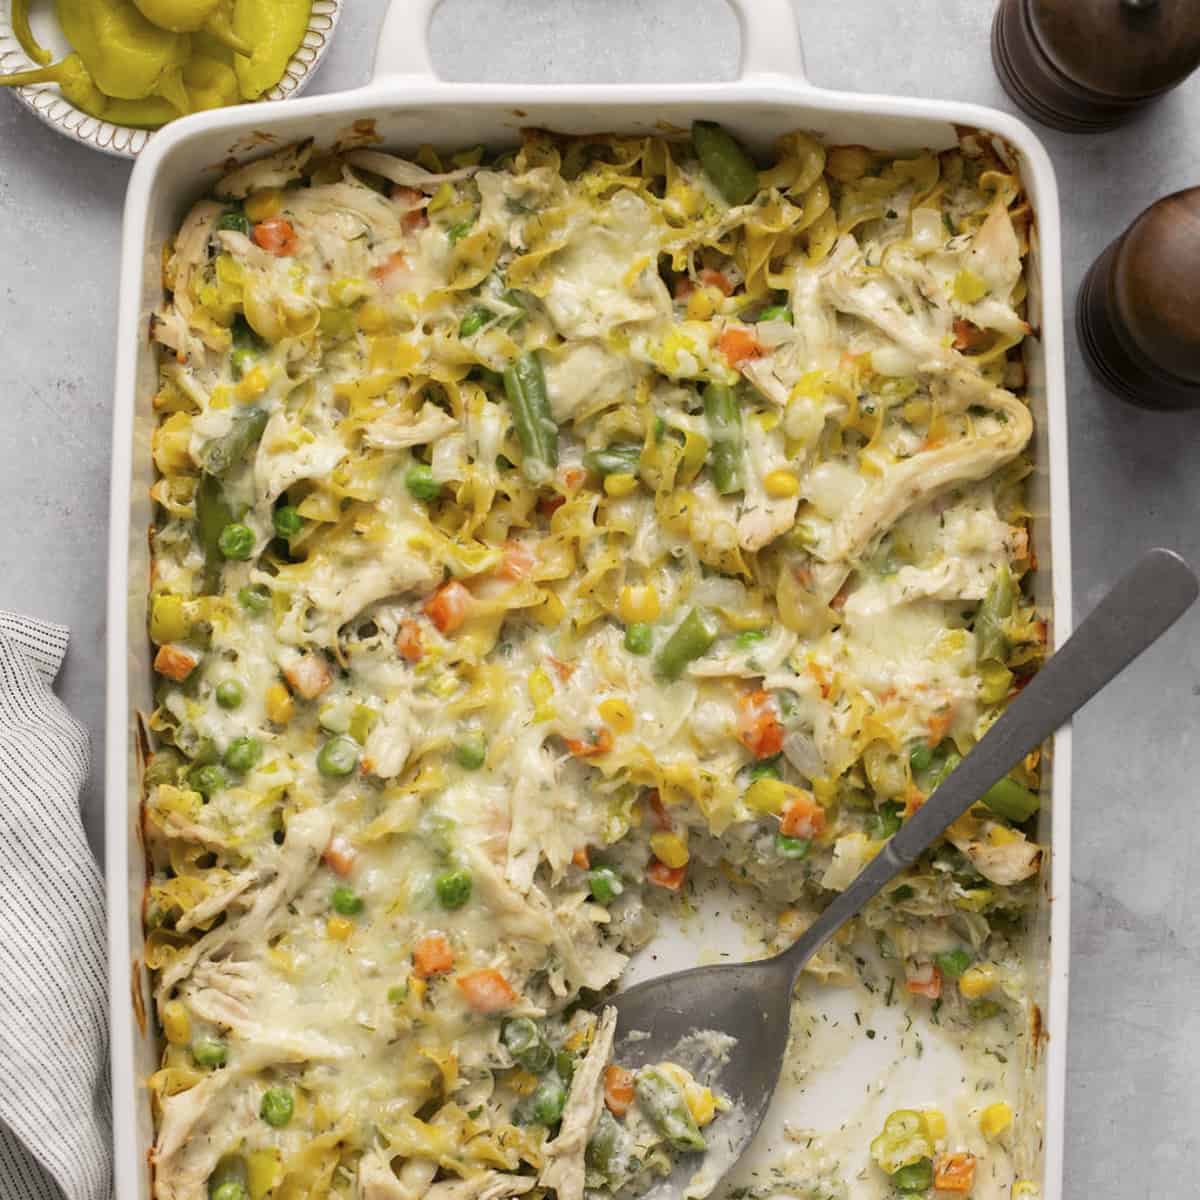 Chicken casserole fully baked with a spoon.